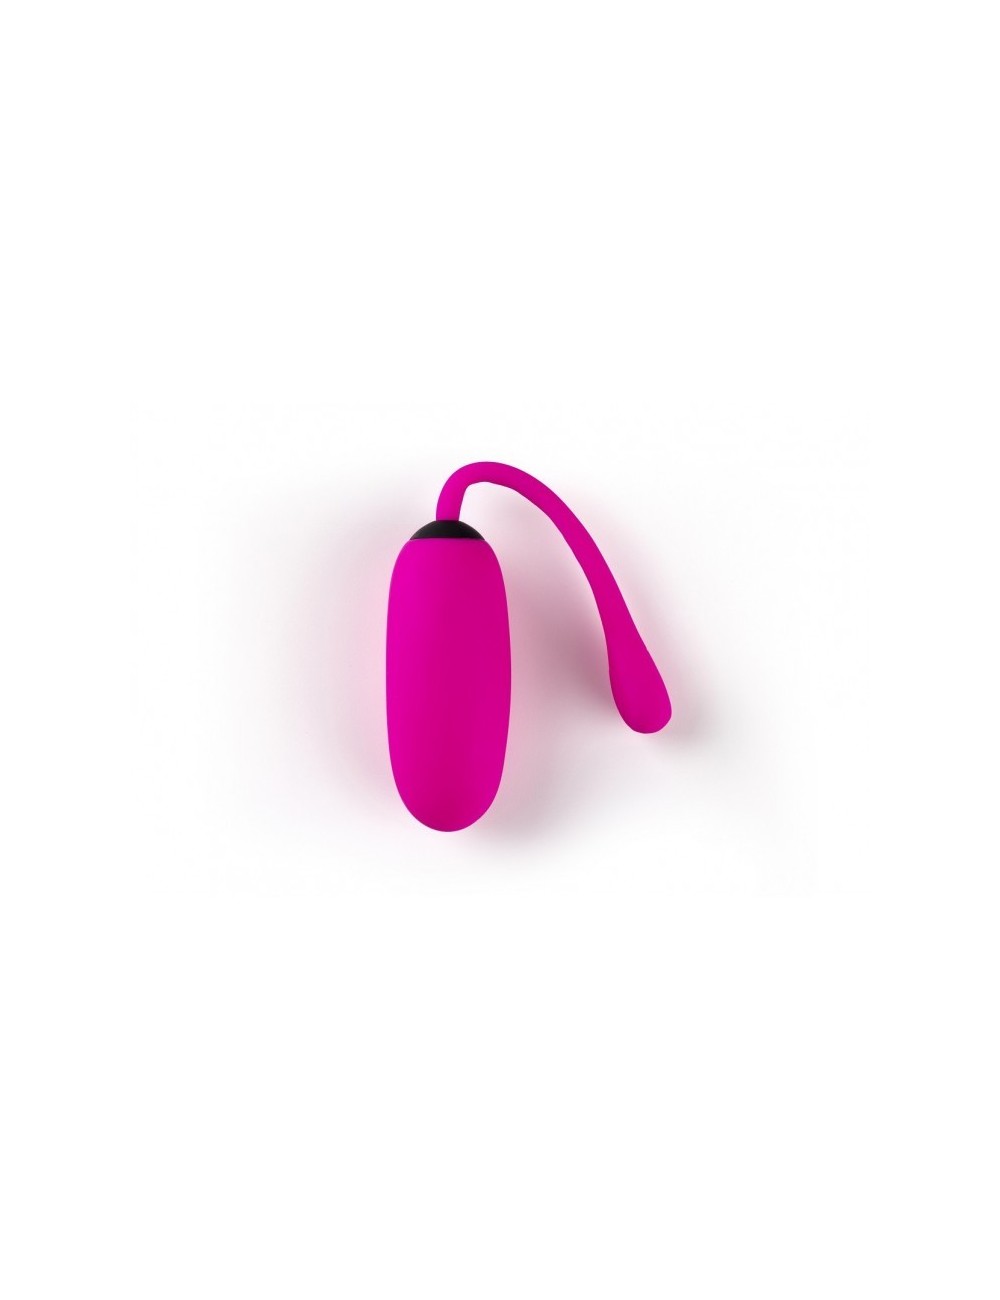 OEUF VIBRANT RECHARGEABLE G7 ROSE